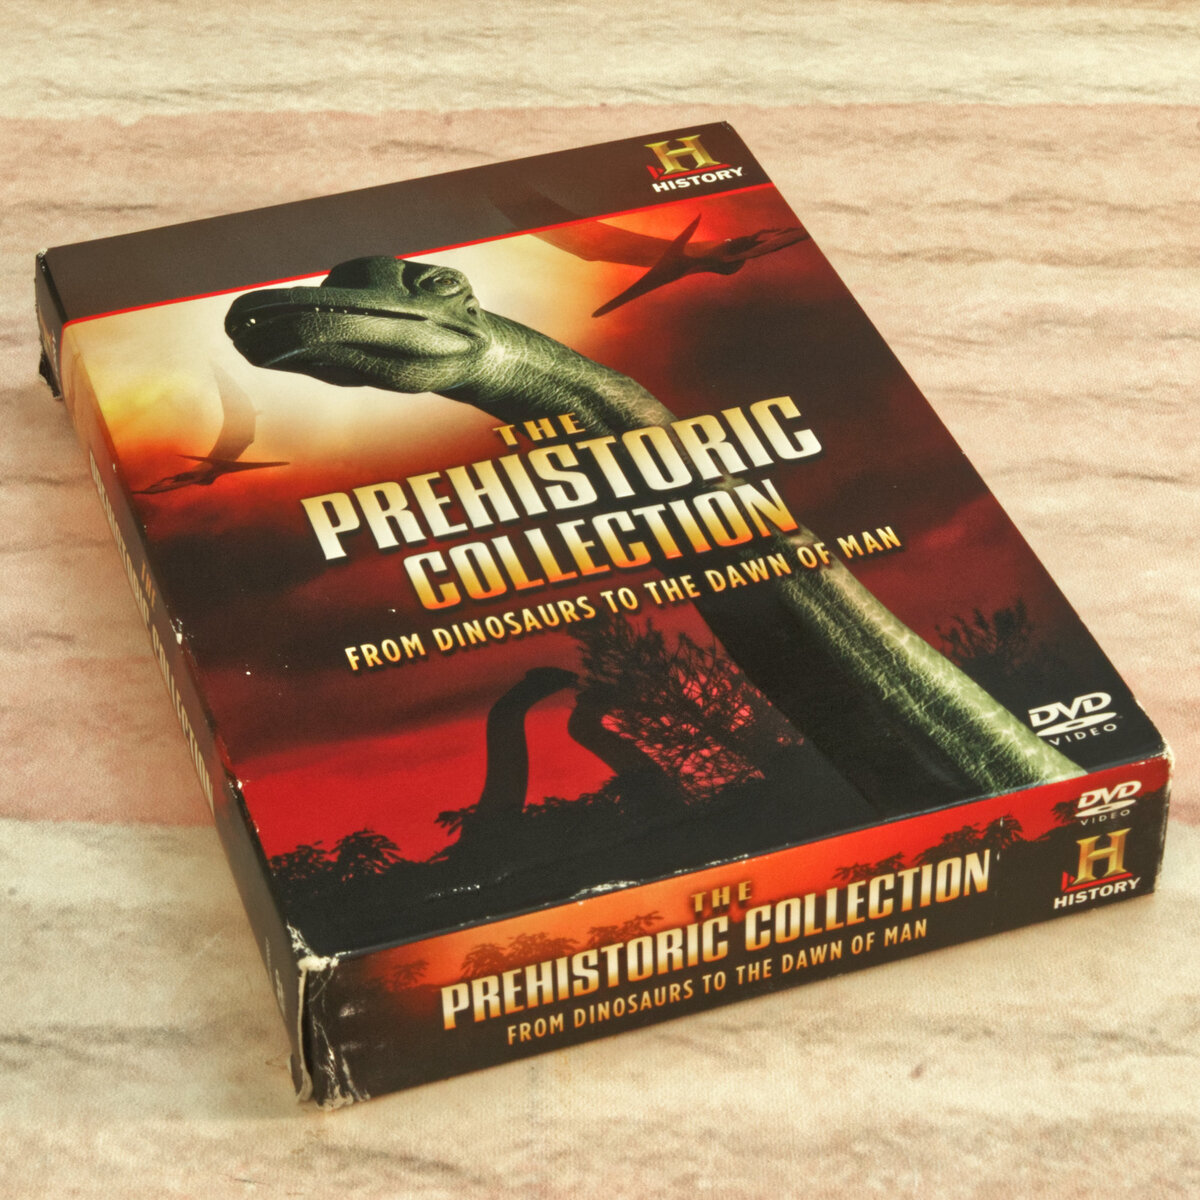 Prehistoric Collection: From Dinosaurs to Dawn [DVD]